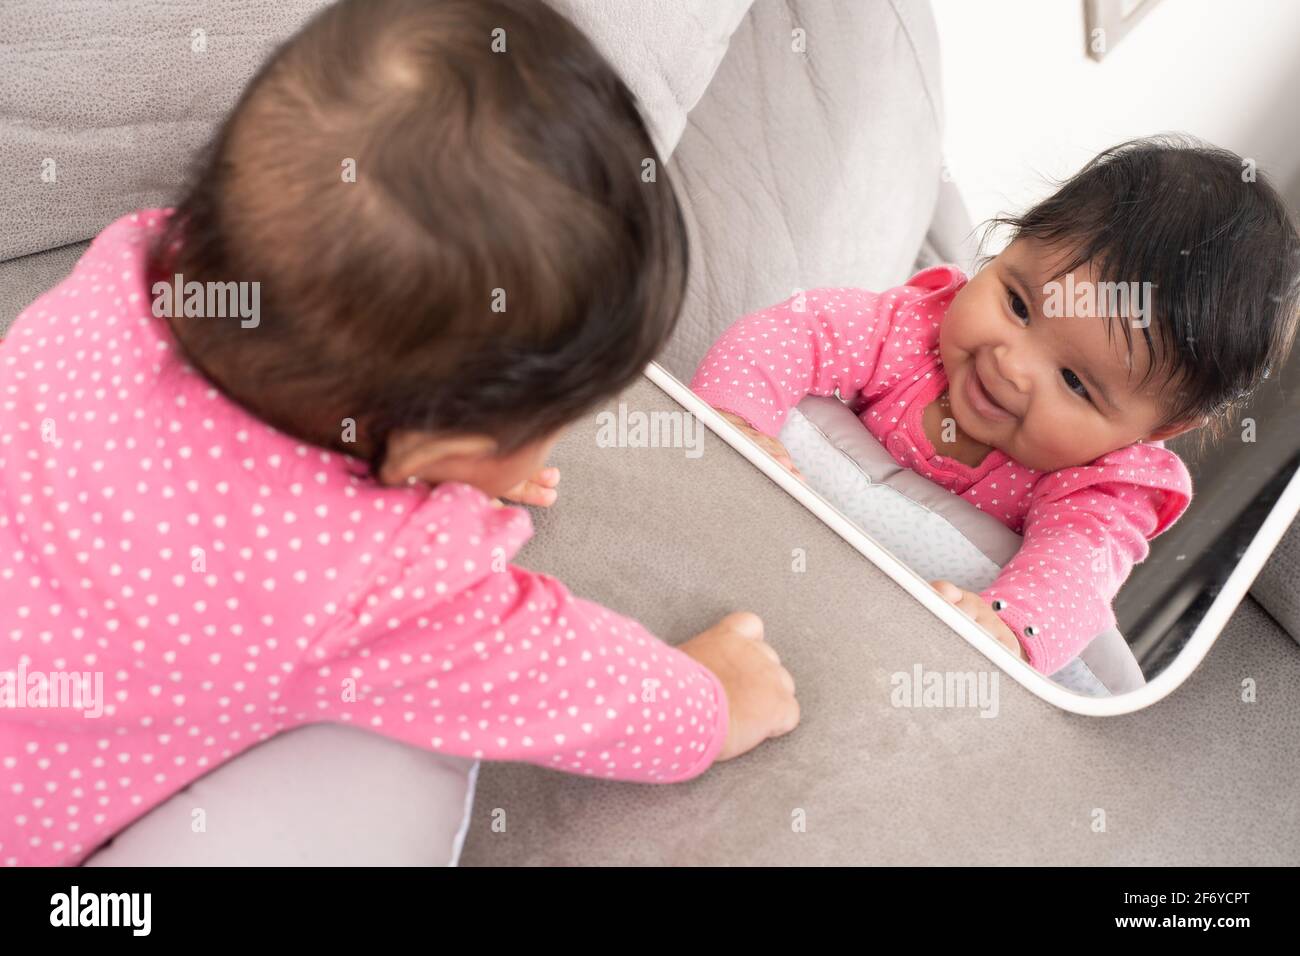 4 month old baby girl looking at self in mirror, smiling Stock Photo